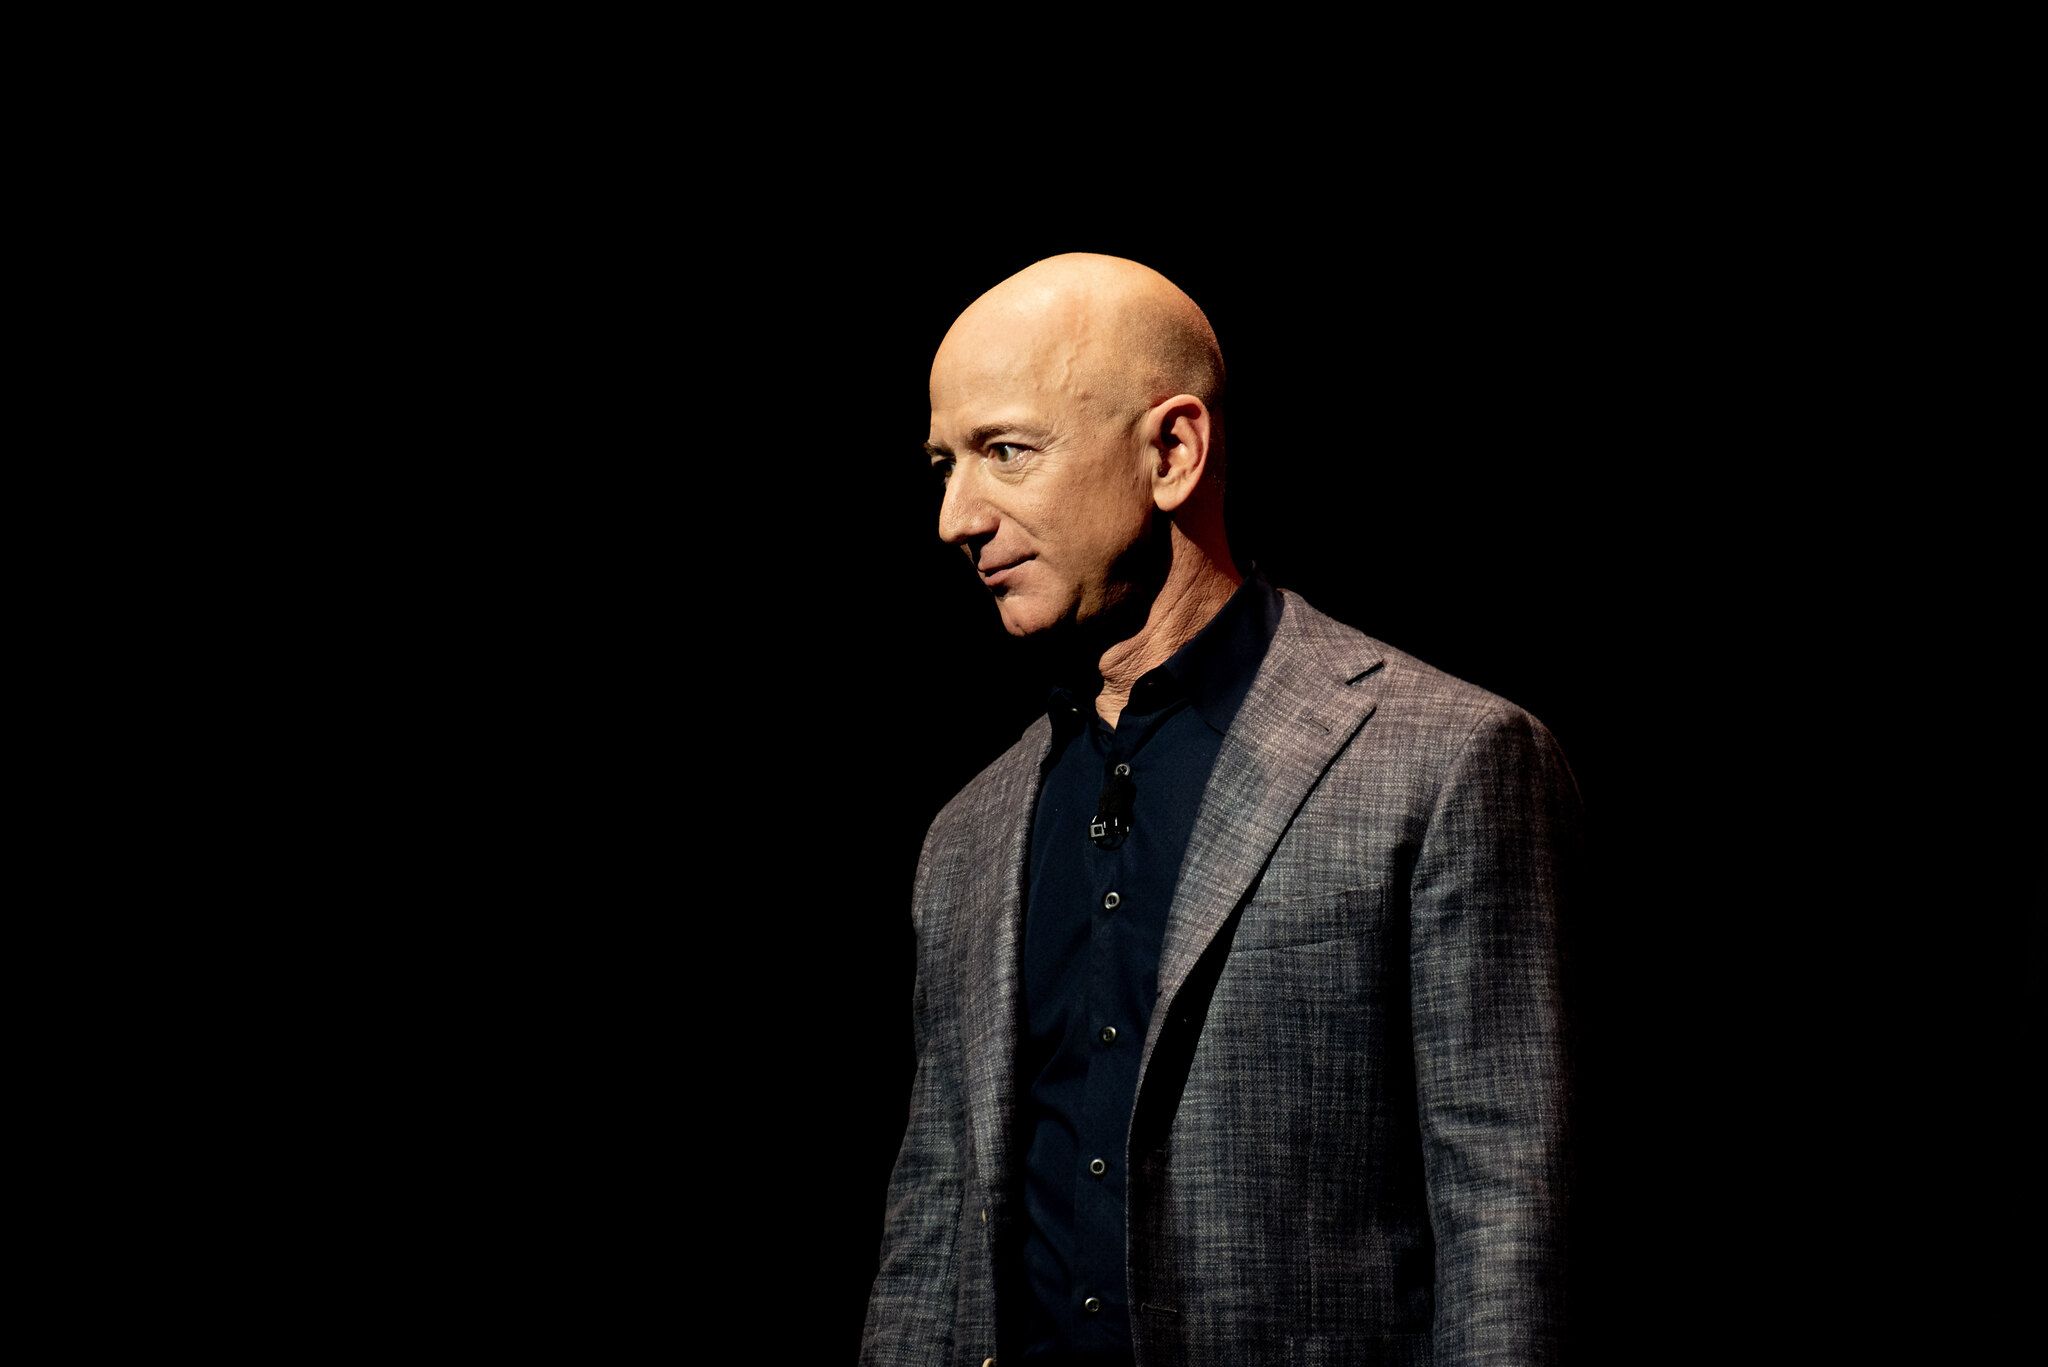 Jeff Bezos in a suit and open-neck black shirt in front of a black background.